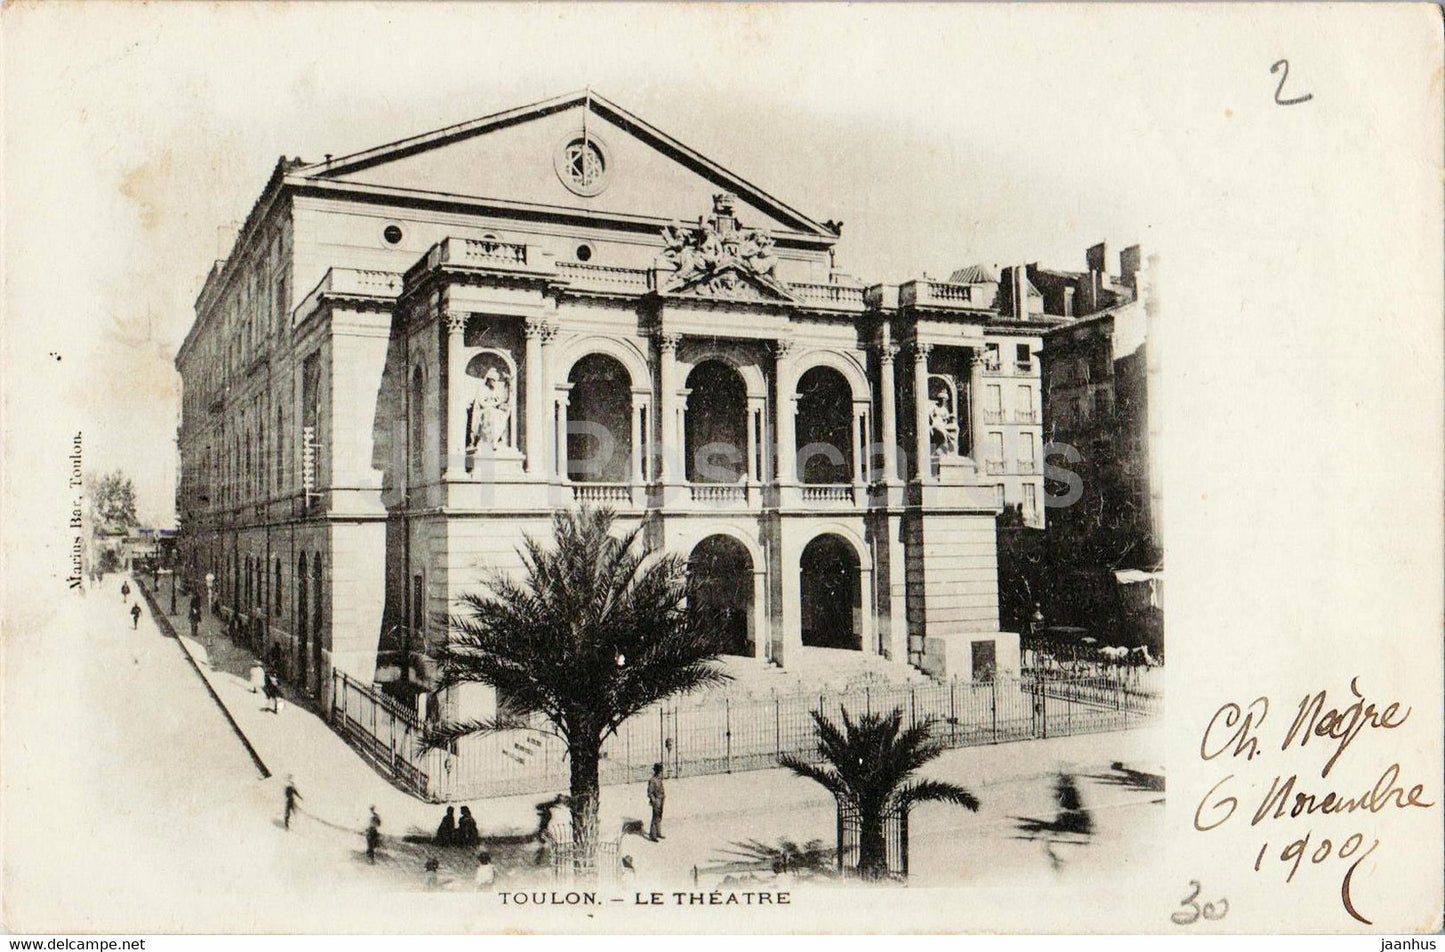 Toulon - Le Theatre - old postcard - 1900 - France - used - JH Postcards